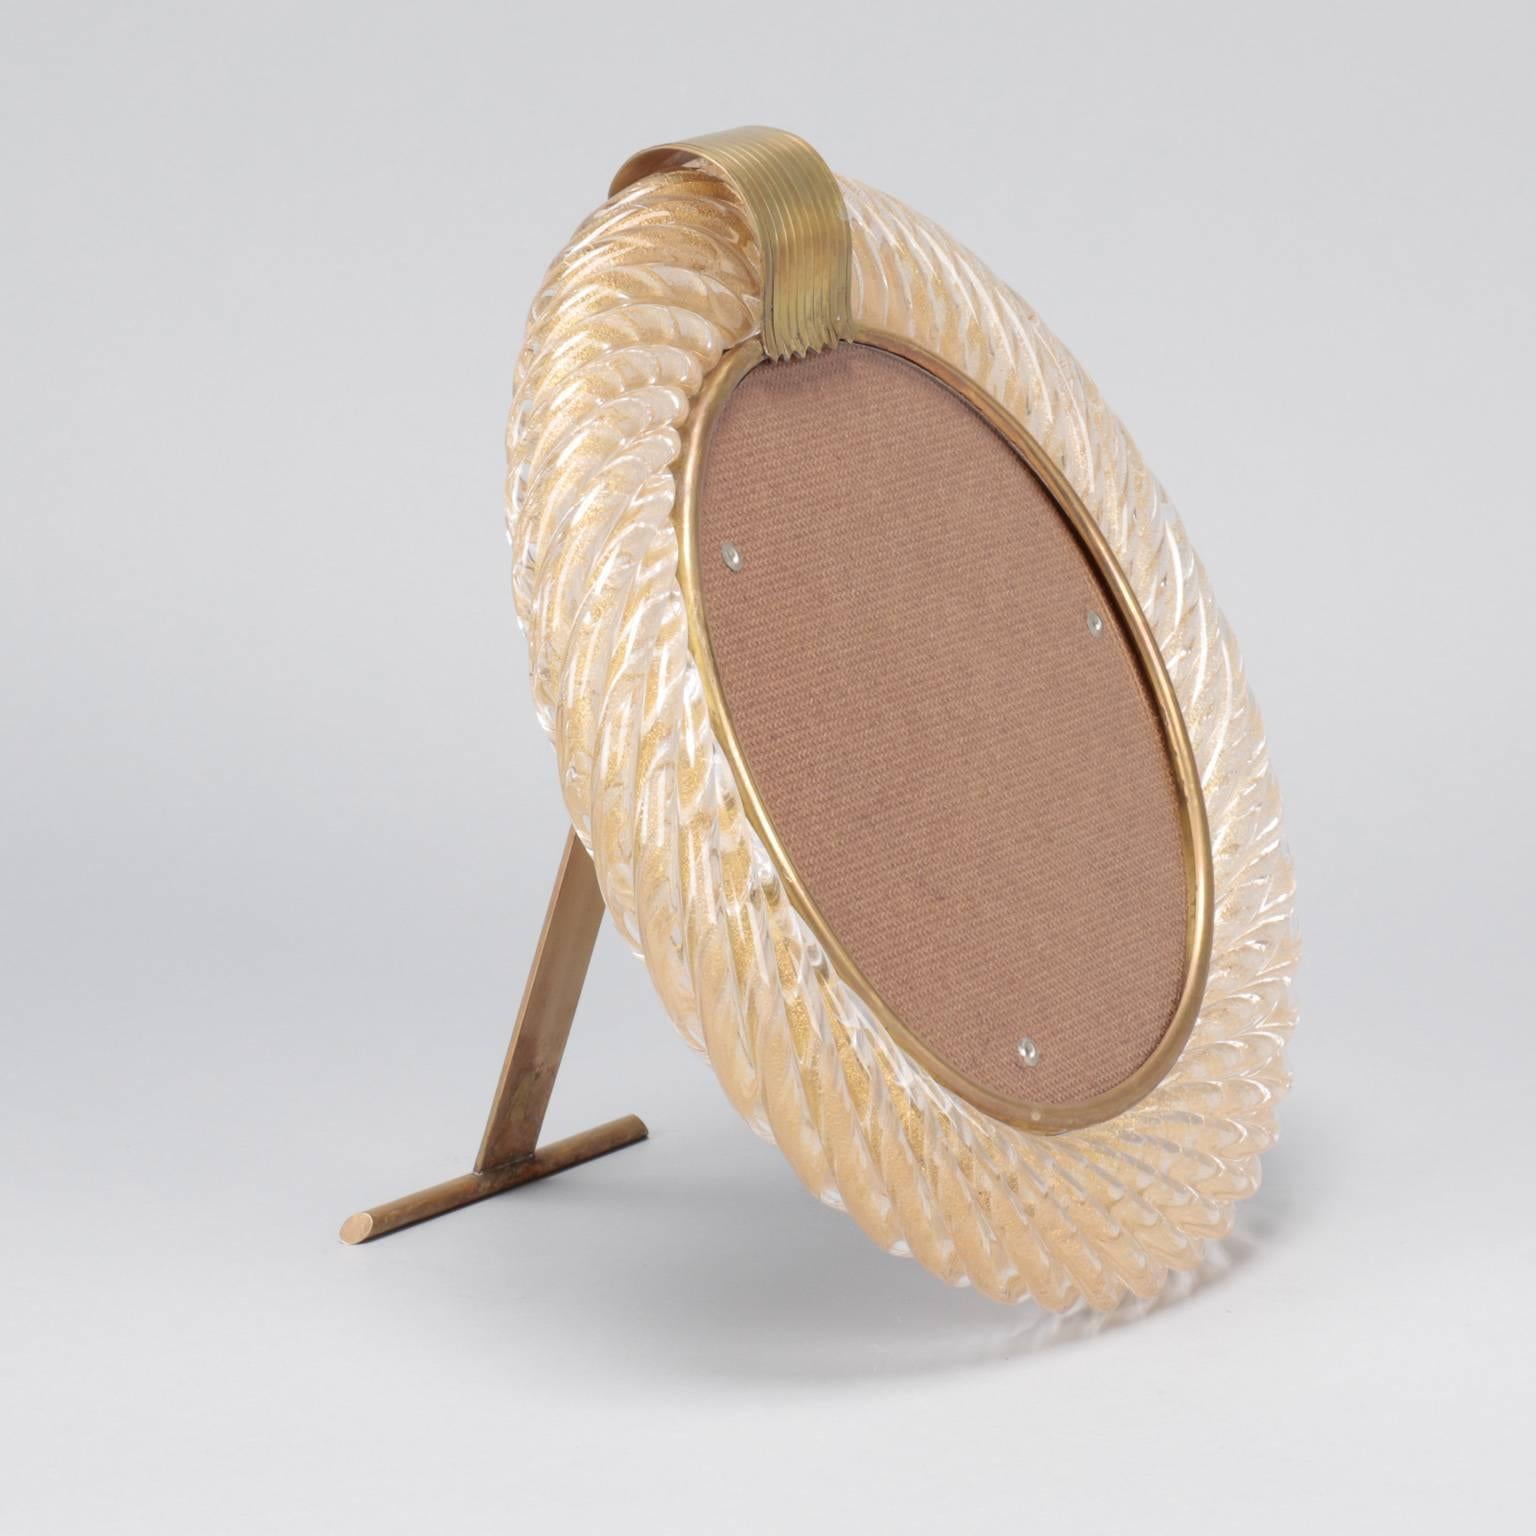 Signed Barovier & Toso round glass picture frame in a pale peach pink ribbed glass with gold inclusions and brass hardware. Manufacturer name is incised on back stand, circa 1940.